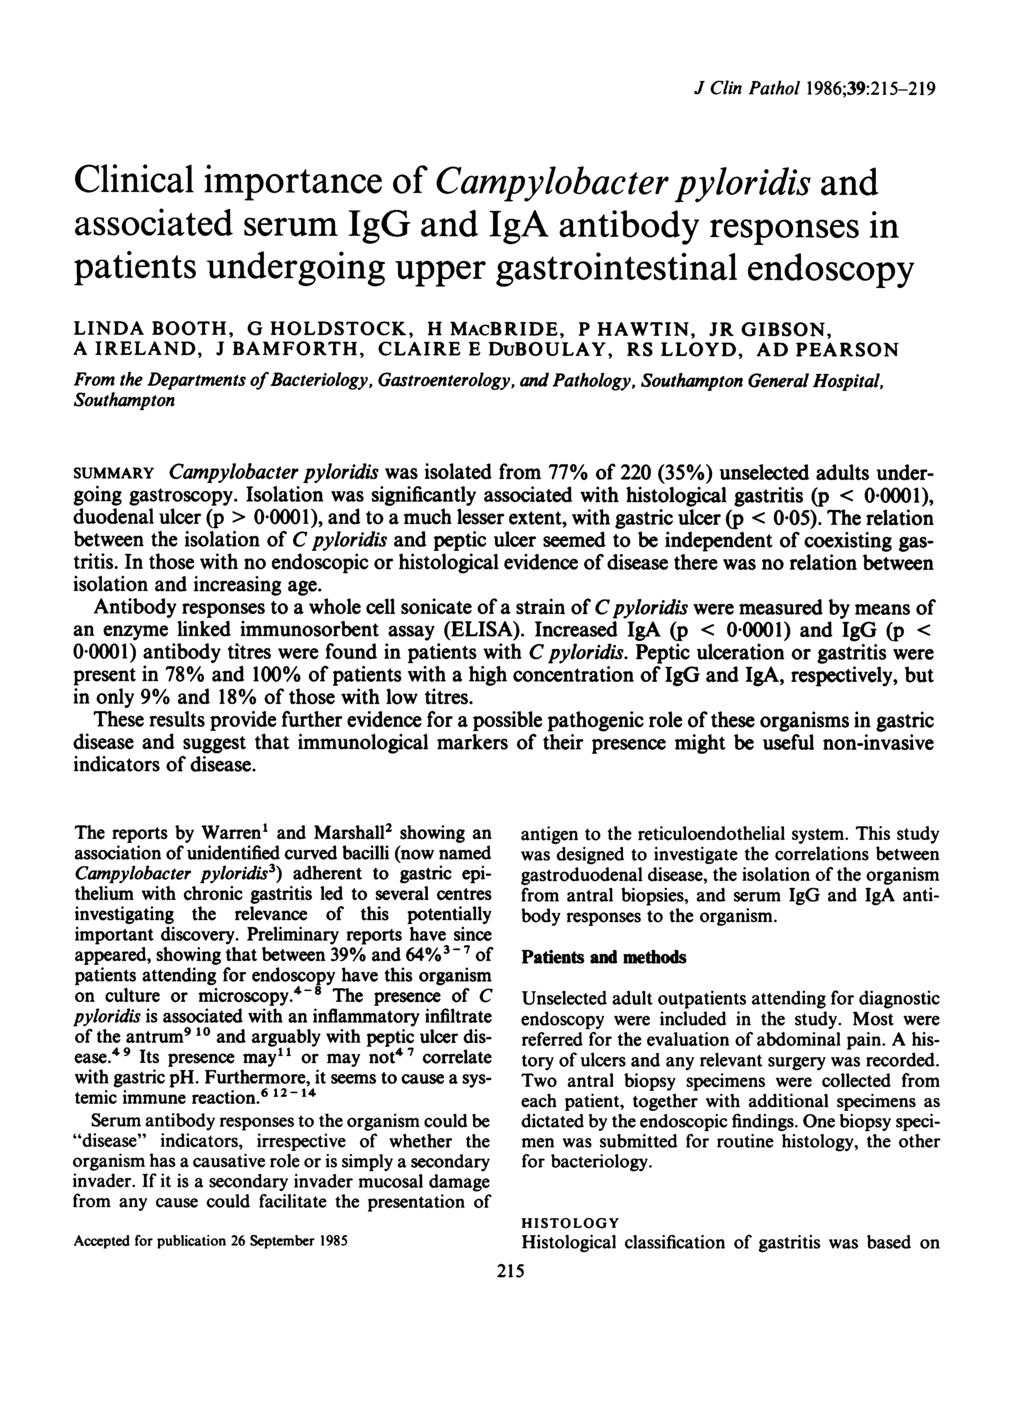 J Clin Pathol 1986;39:215-219 Clinical importance of Campylobacter pyloridis and associated serum IgG and IgA antibody responses in patients undergoing upper gastrointestinal endoscopy LINDA BOOTH, G